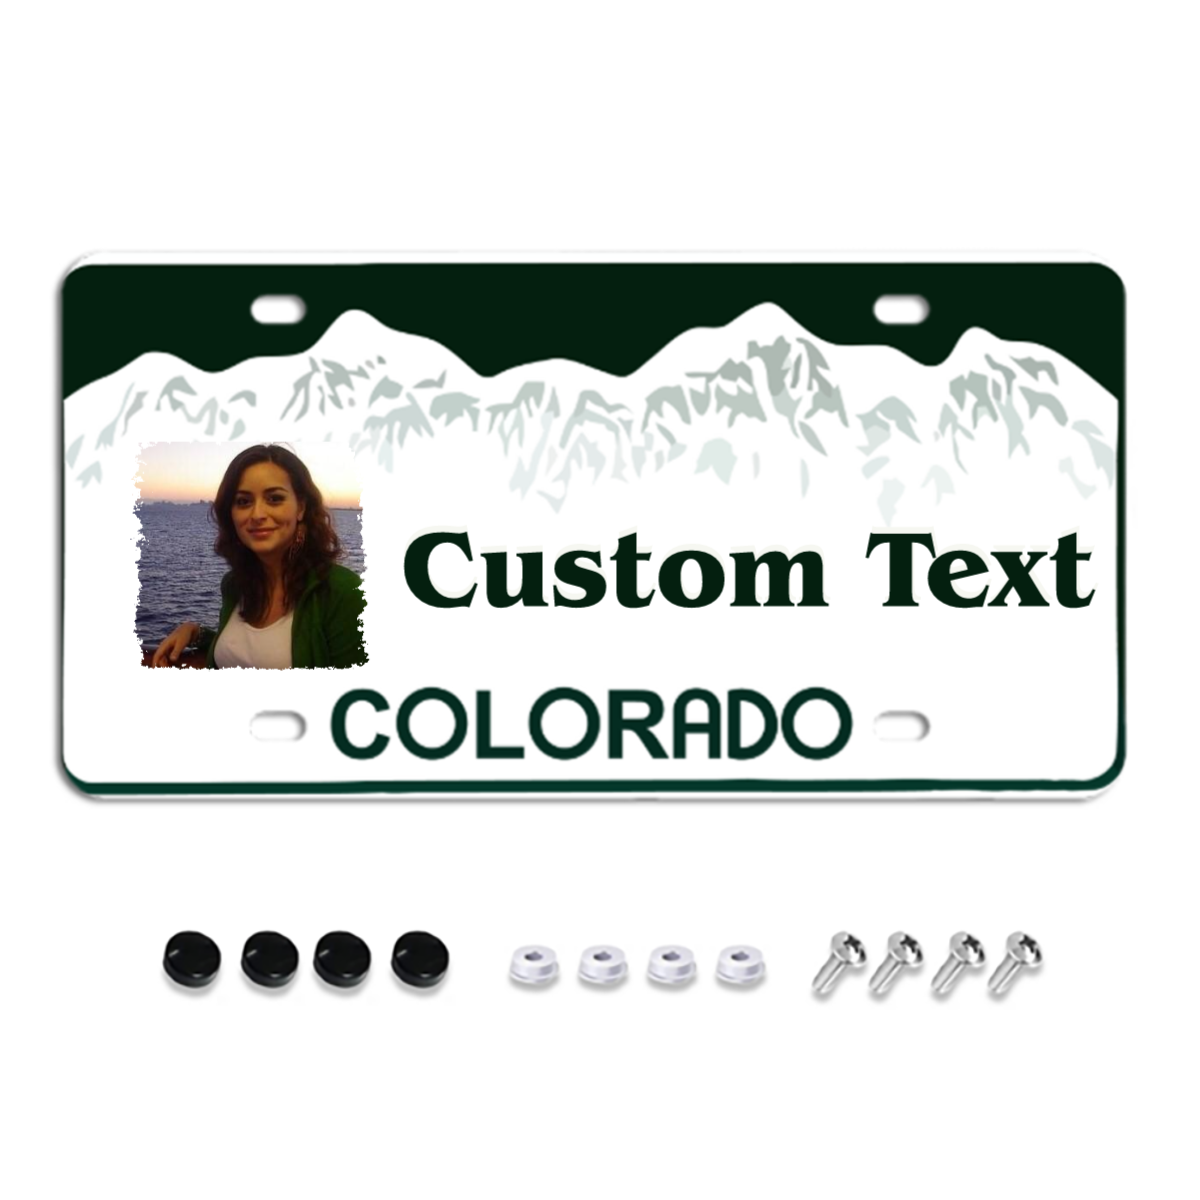 Colorado Custom License Plates, Personalized Photo & Text & Background